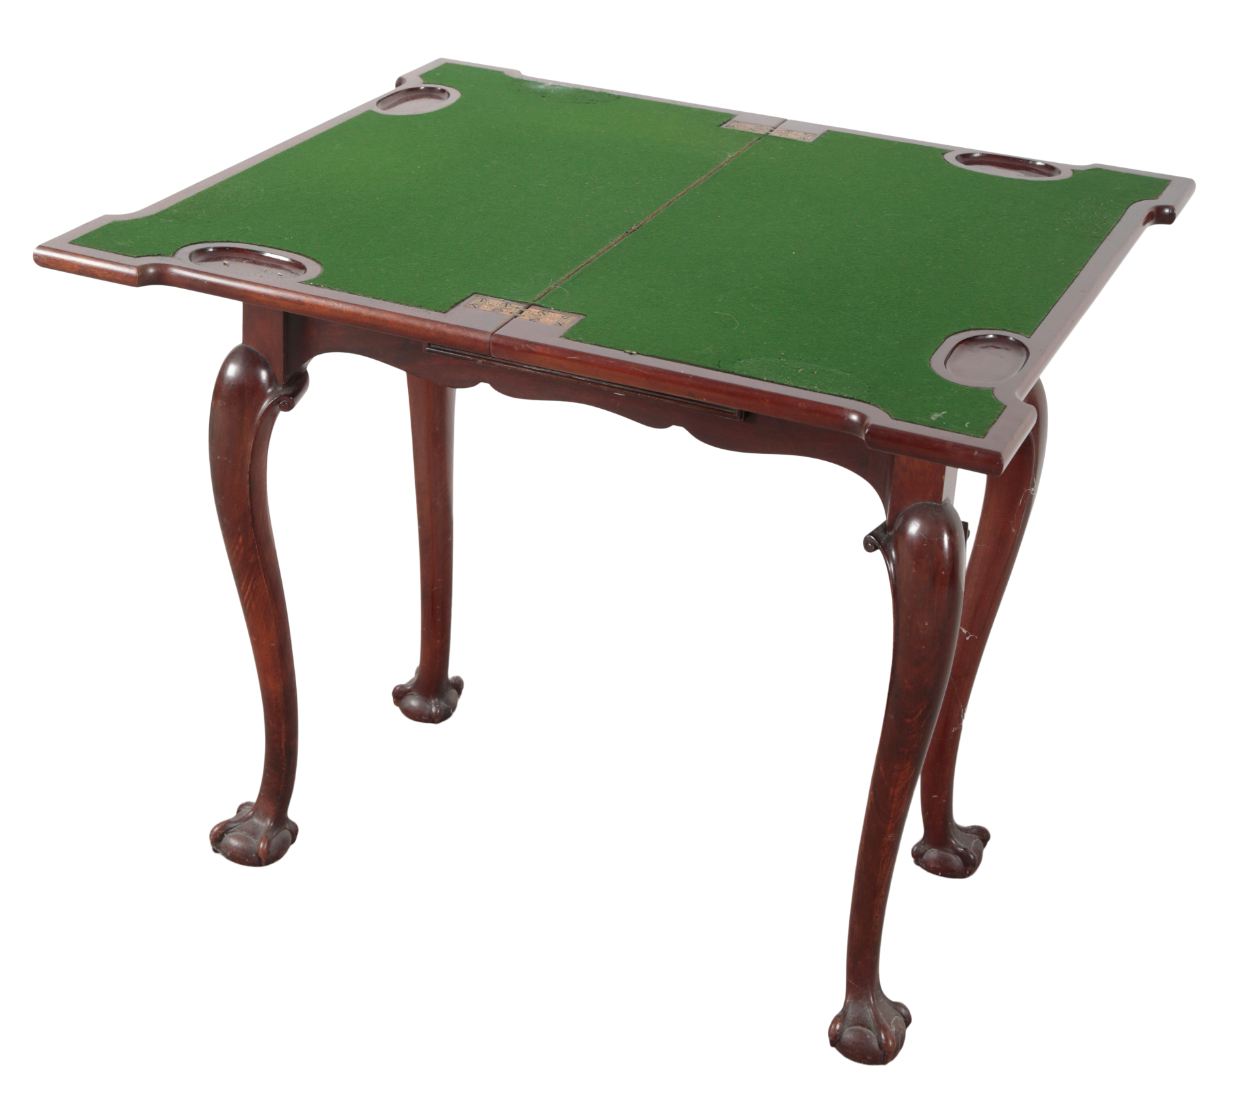 AN EARLY GEORGE III STYLE MAHOGANY CARD TABLE - Image 2 of 2